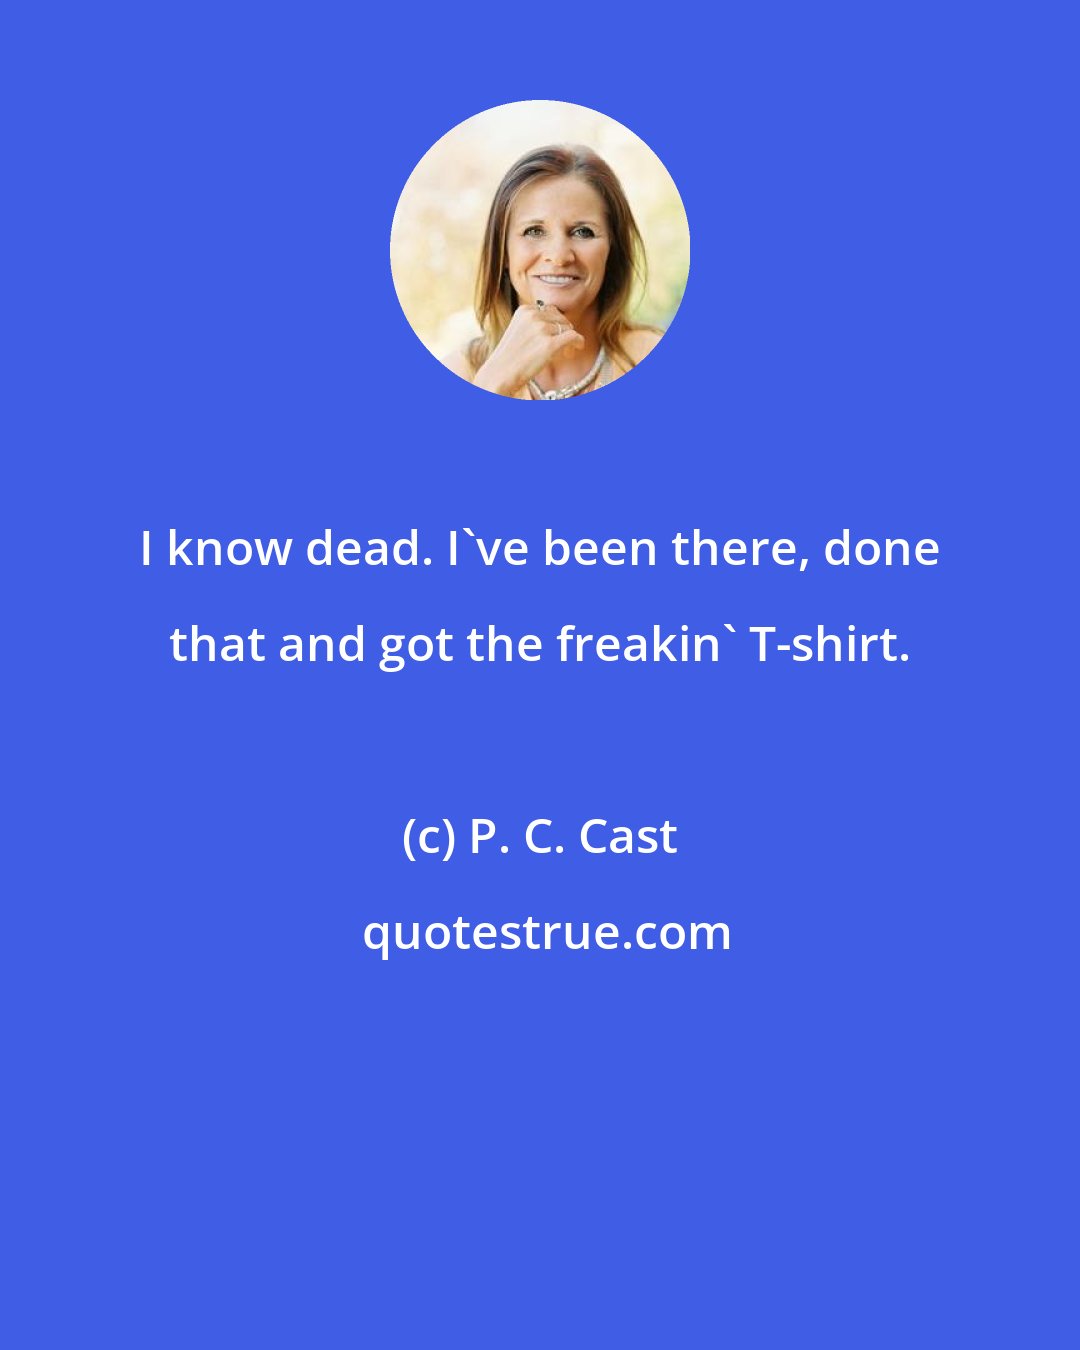 P. C. Cast: I know dead. I've been there, done that and got the freakin' T-shirt.